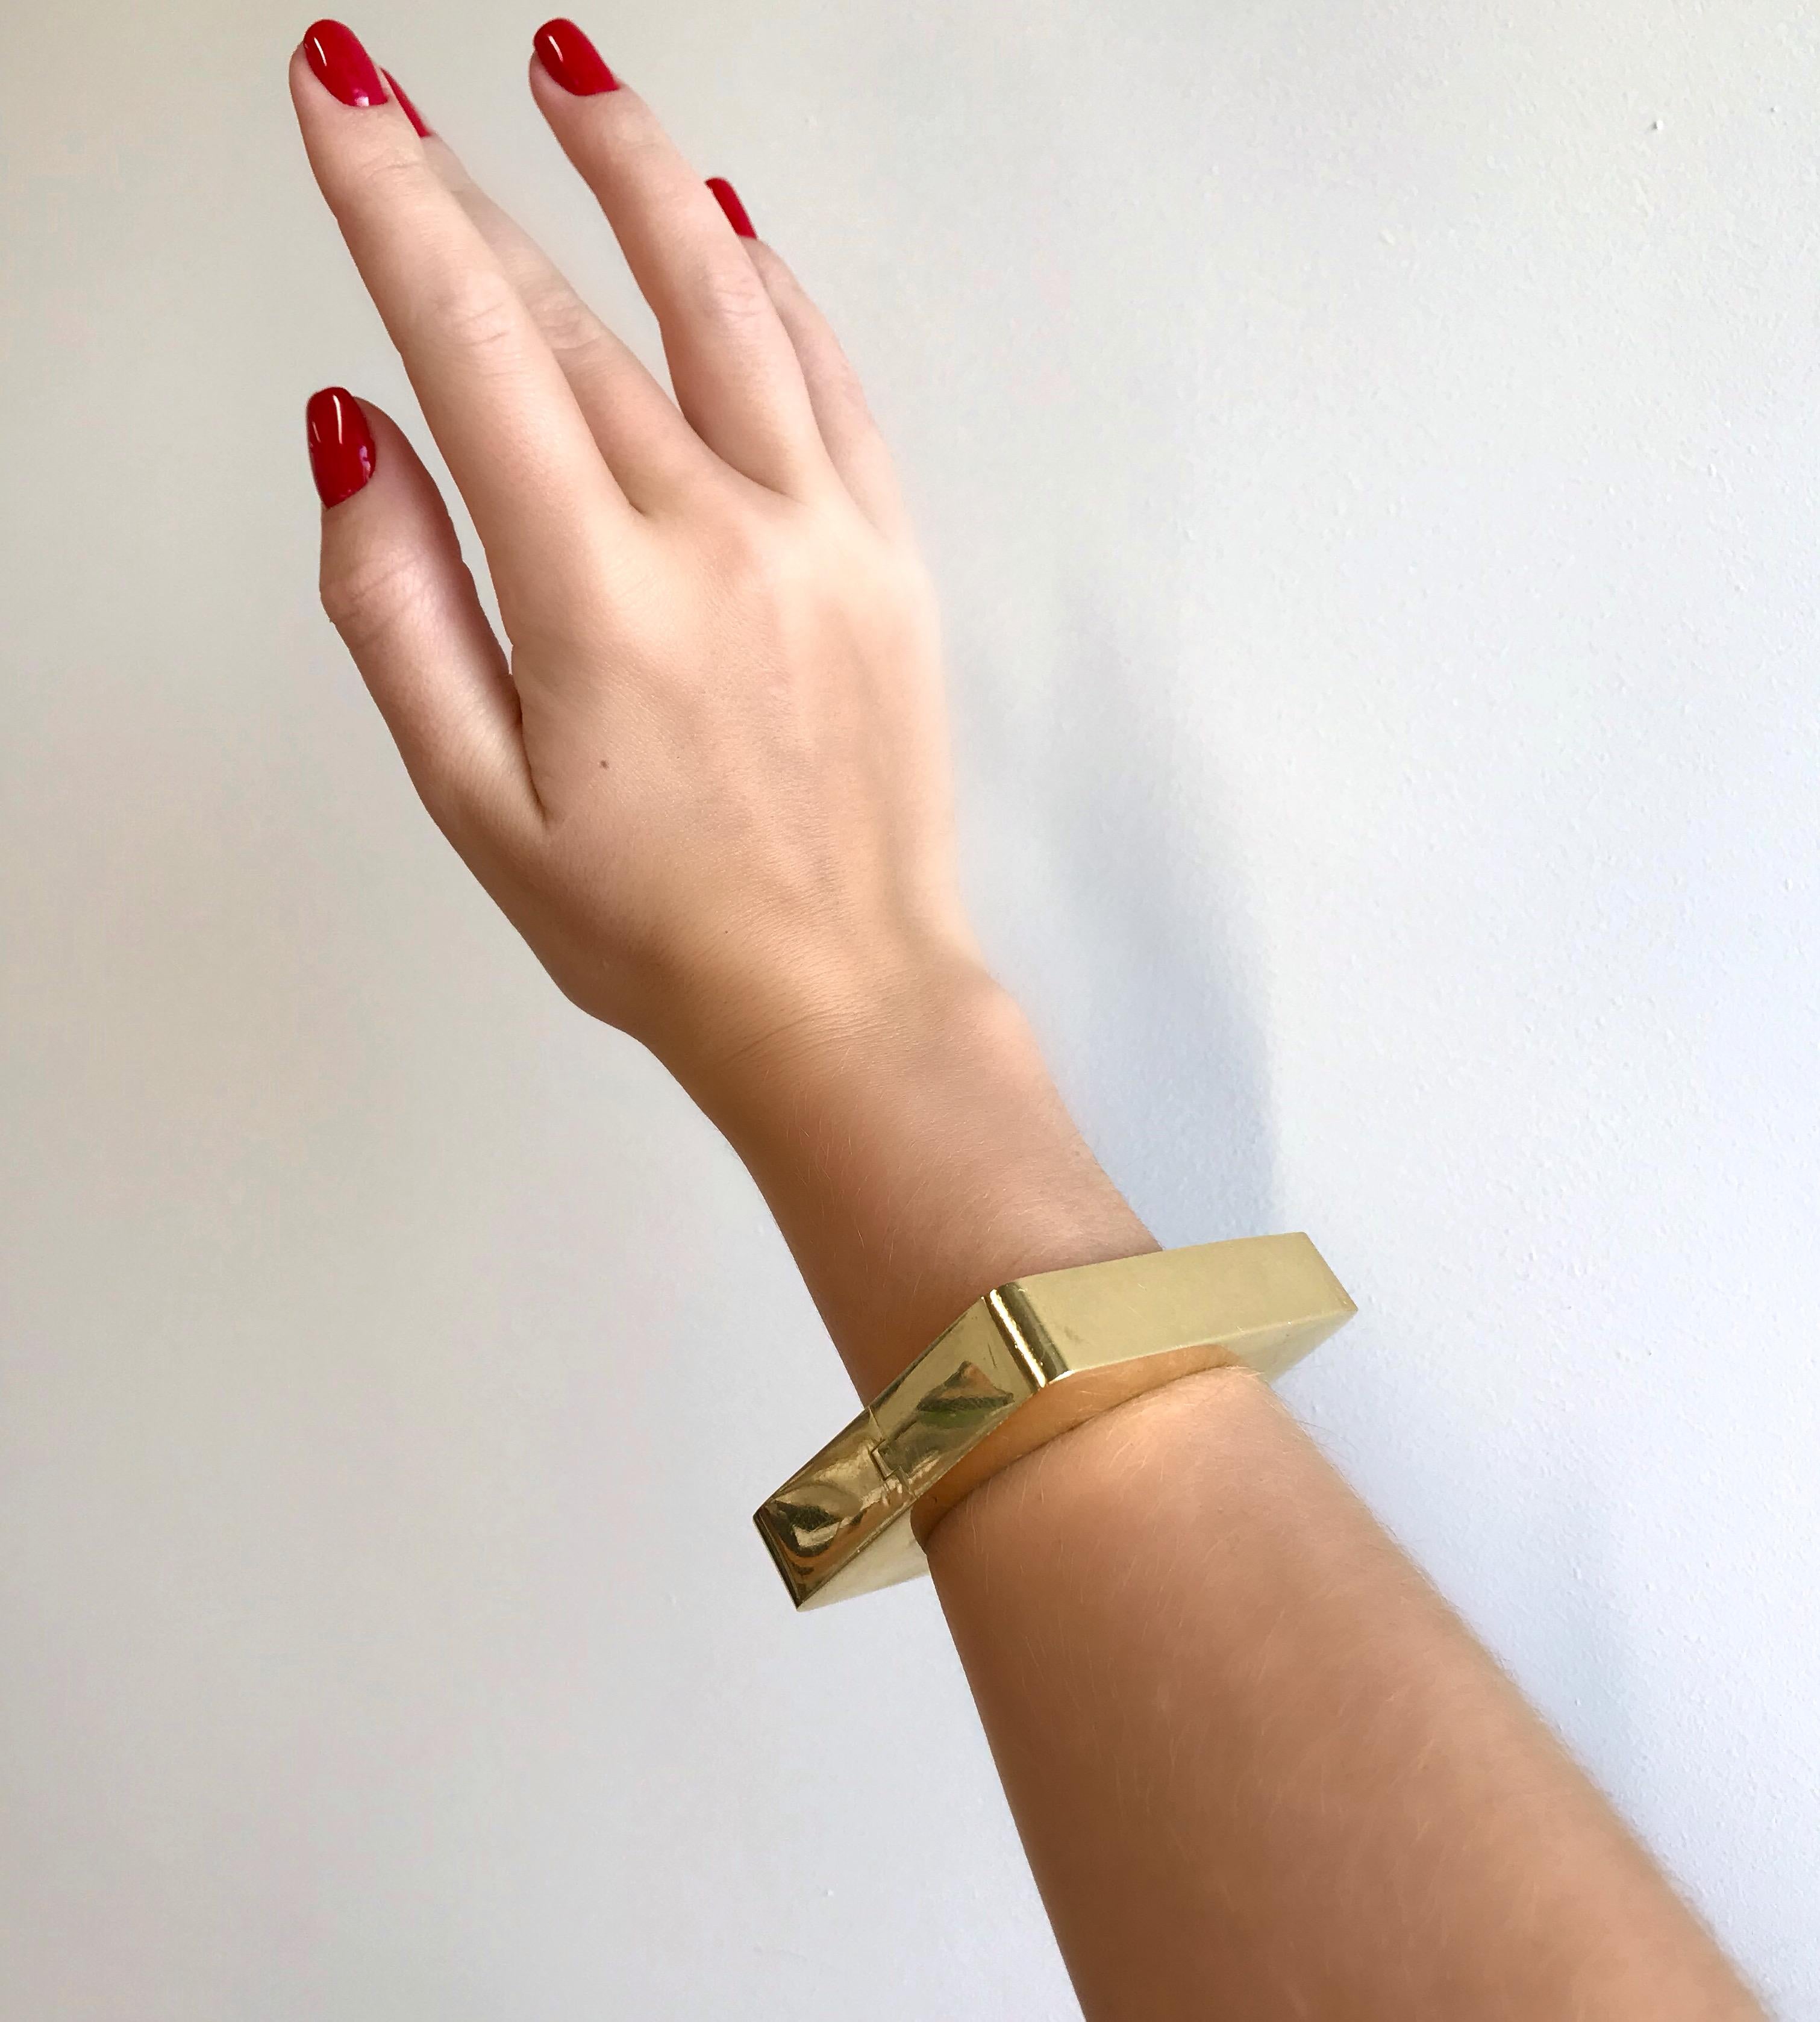 Substantial, bold solid gold bracelets are the hottest trend of 2020. Wear this bracelet with an all-black outfit for a dramatic accent or with neutral tones to complete your look. The solid gold will visually make your hands look slimmer and more